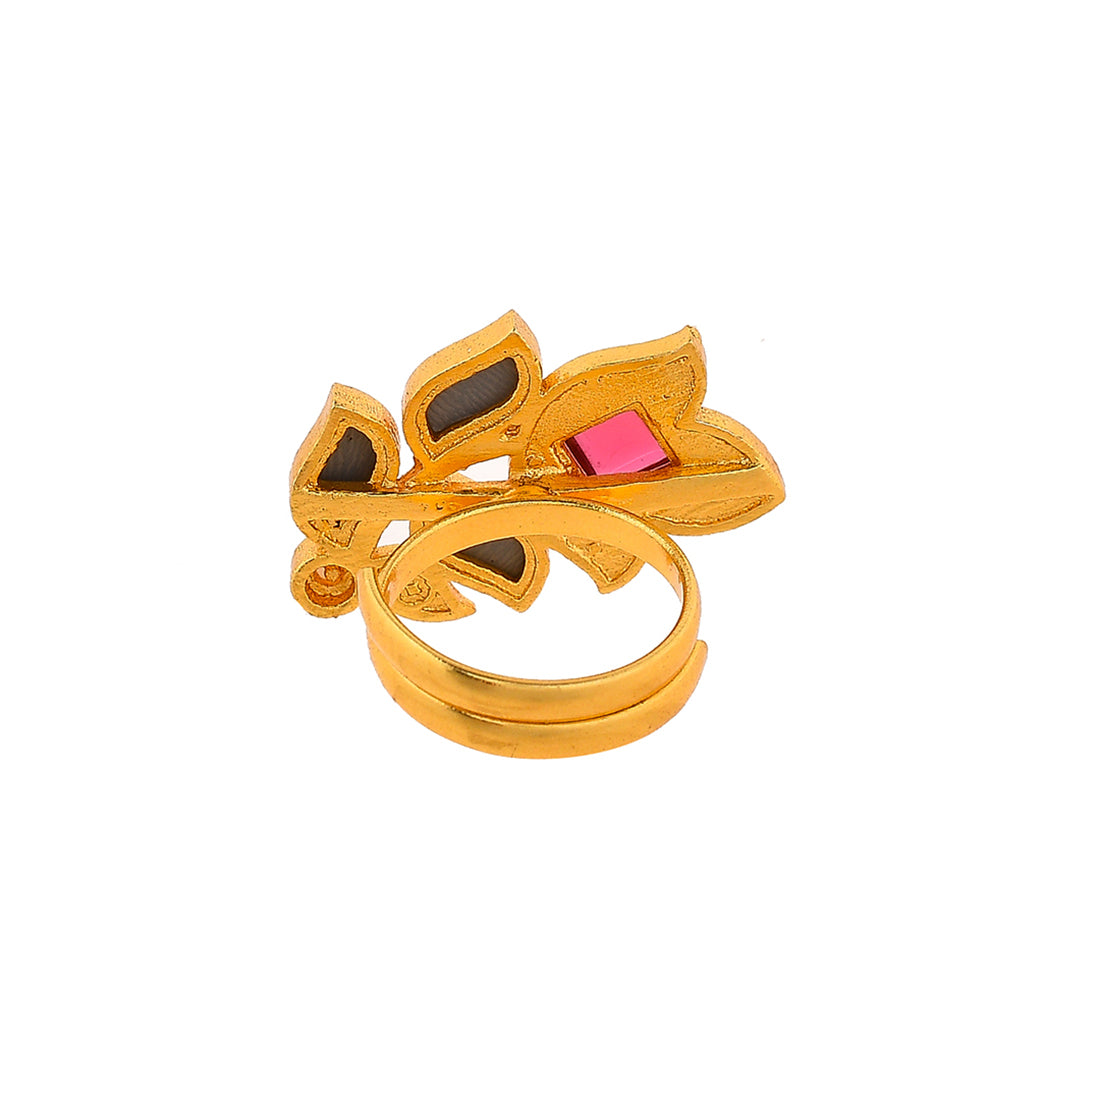 Buy Senco Gold Aura Collection 22k Yellow Gold Ring at Amazon.in | Glamour  jewelry, Yellow gold rings, Gold jewellery design necklaces